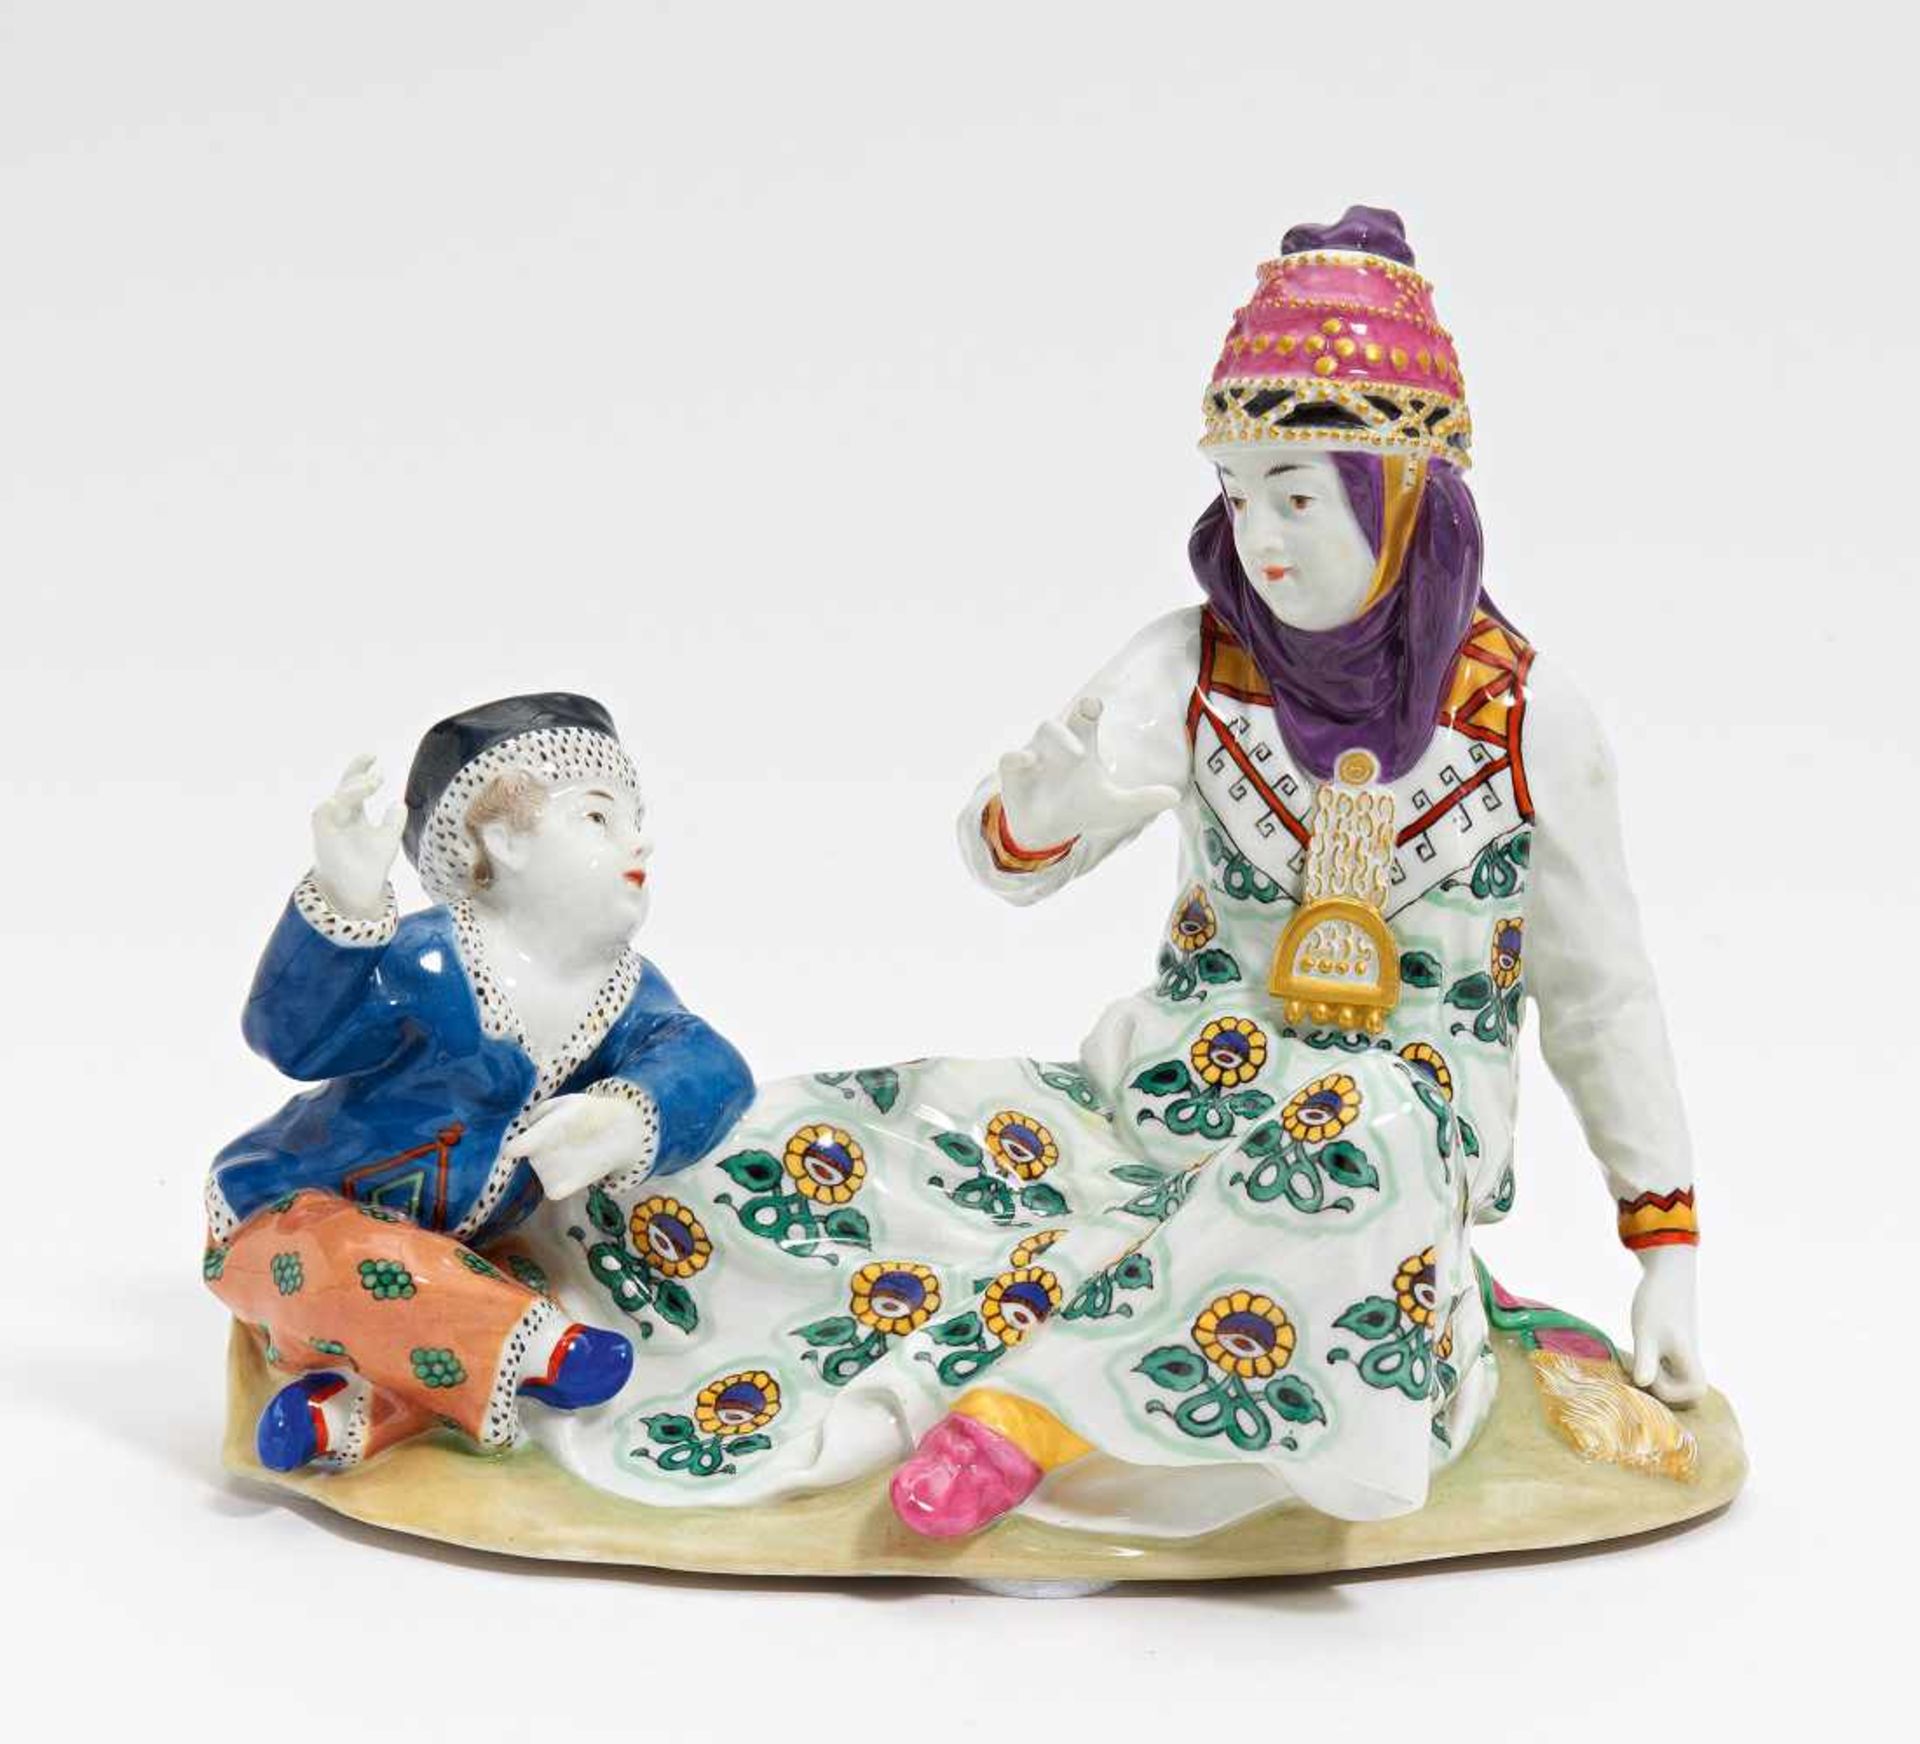 PORCELAIN FIGURE OF A RUSSIAN MOTHER WITH CHILD.